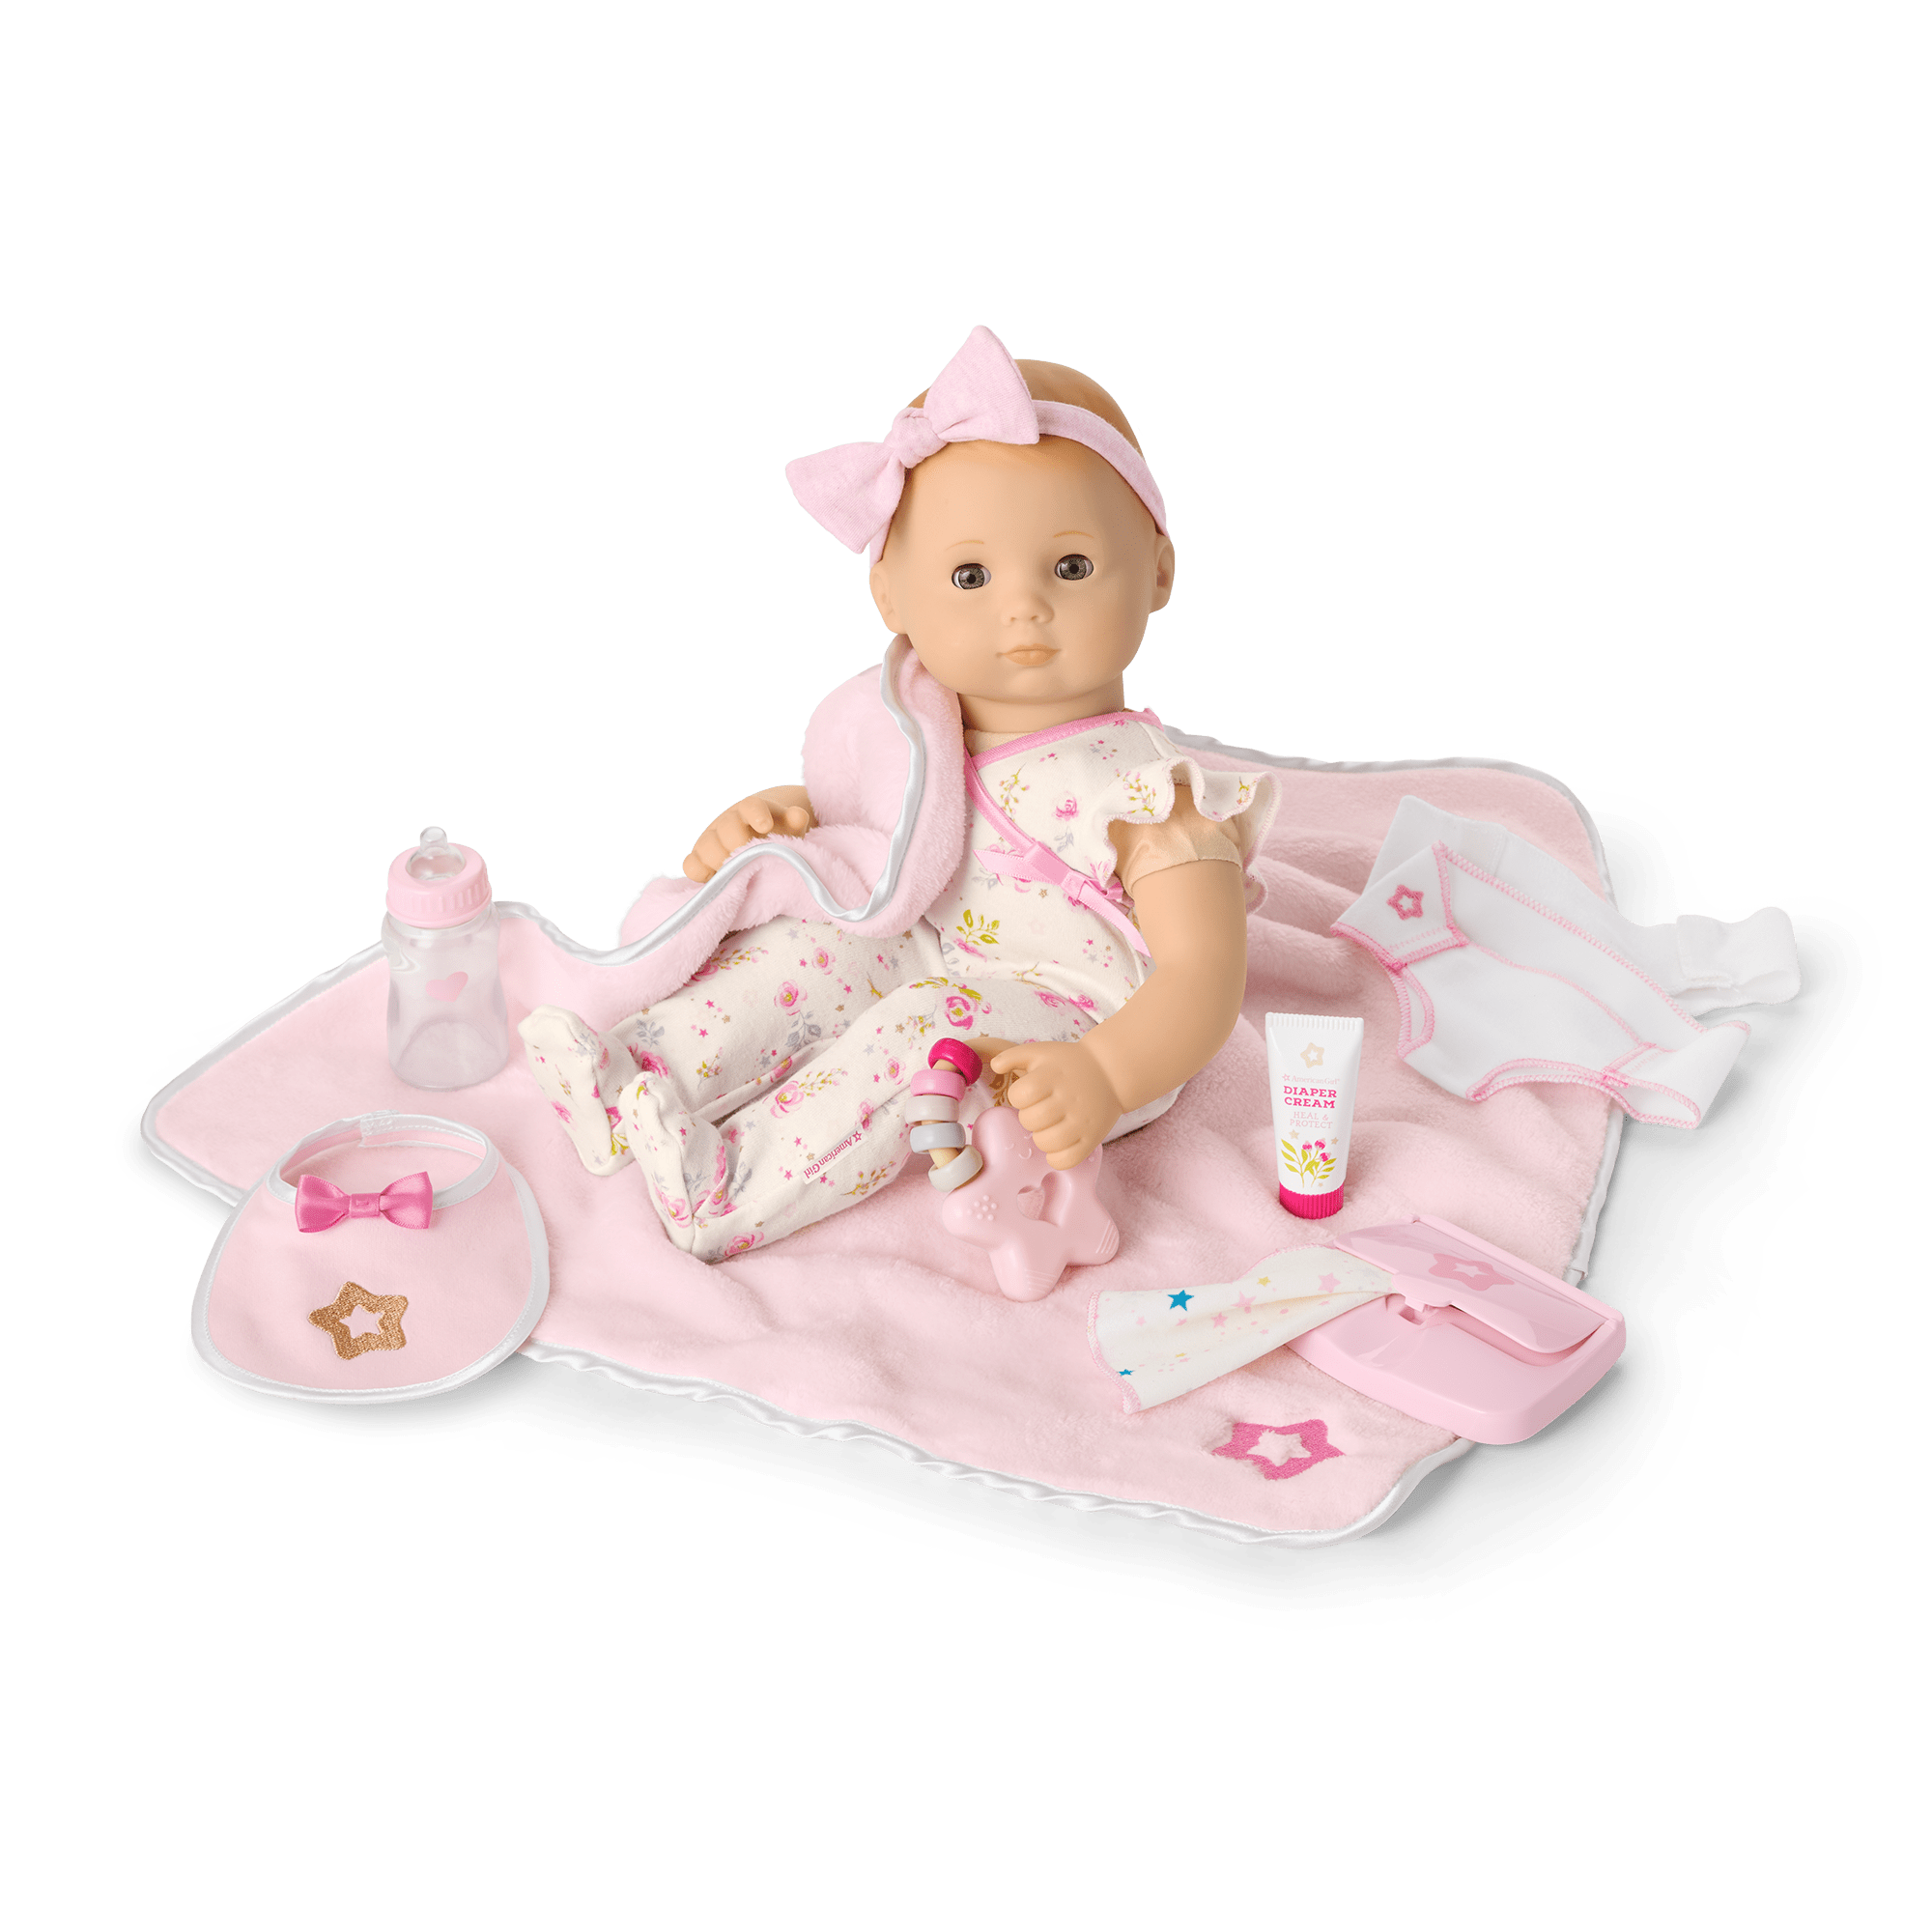 Bitty Baby® Doll #4 Care & Play Set | American Girl®